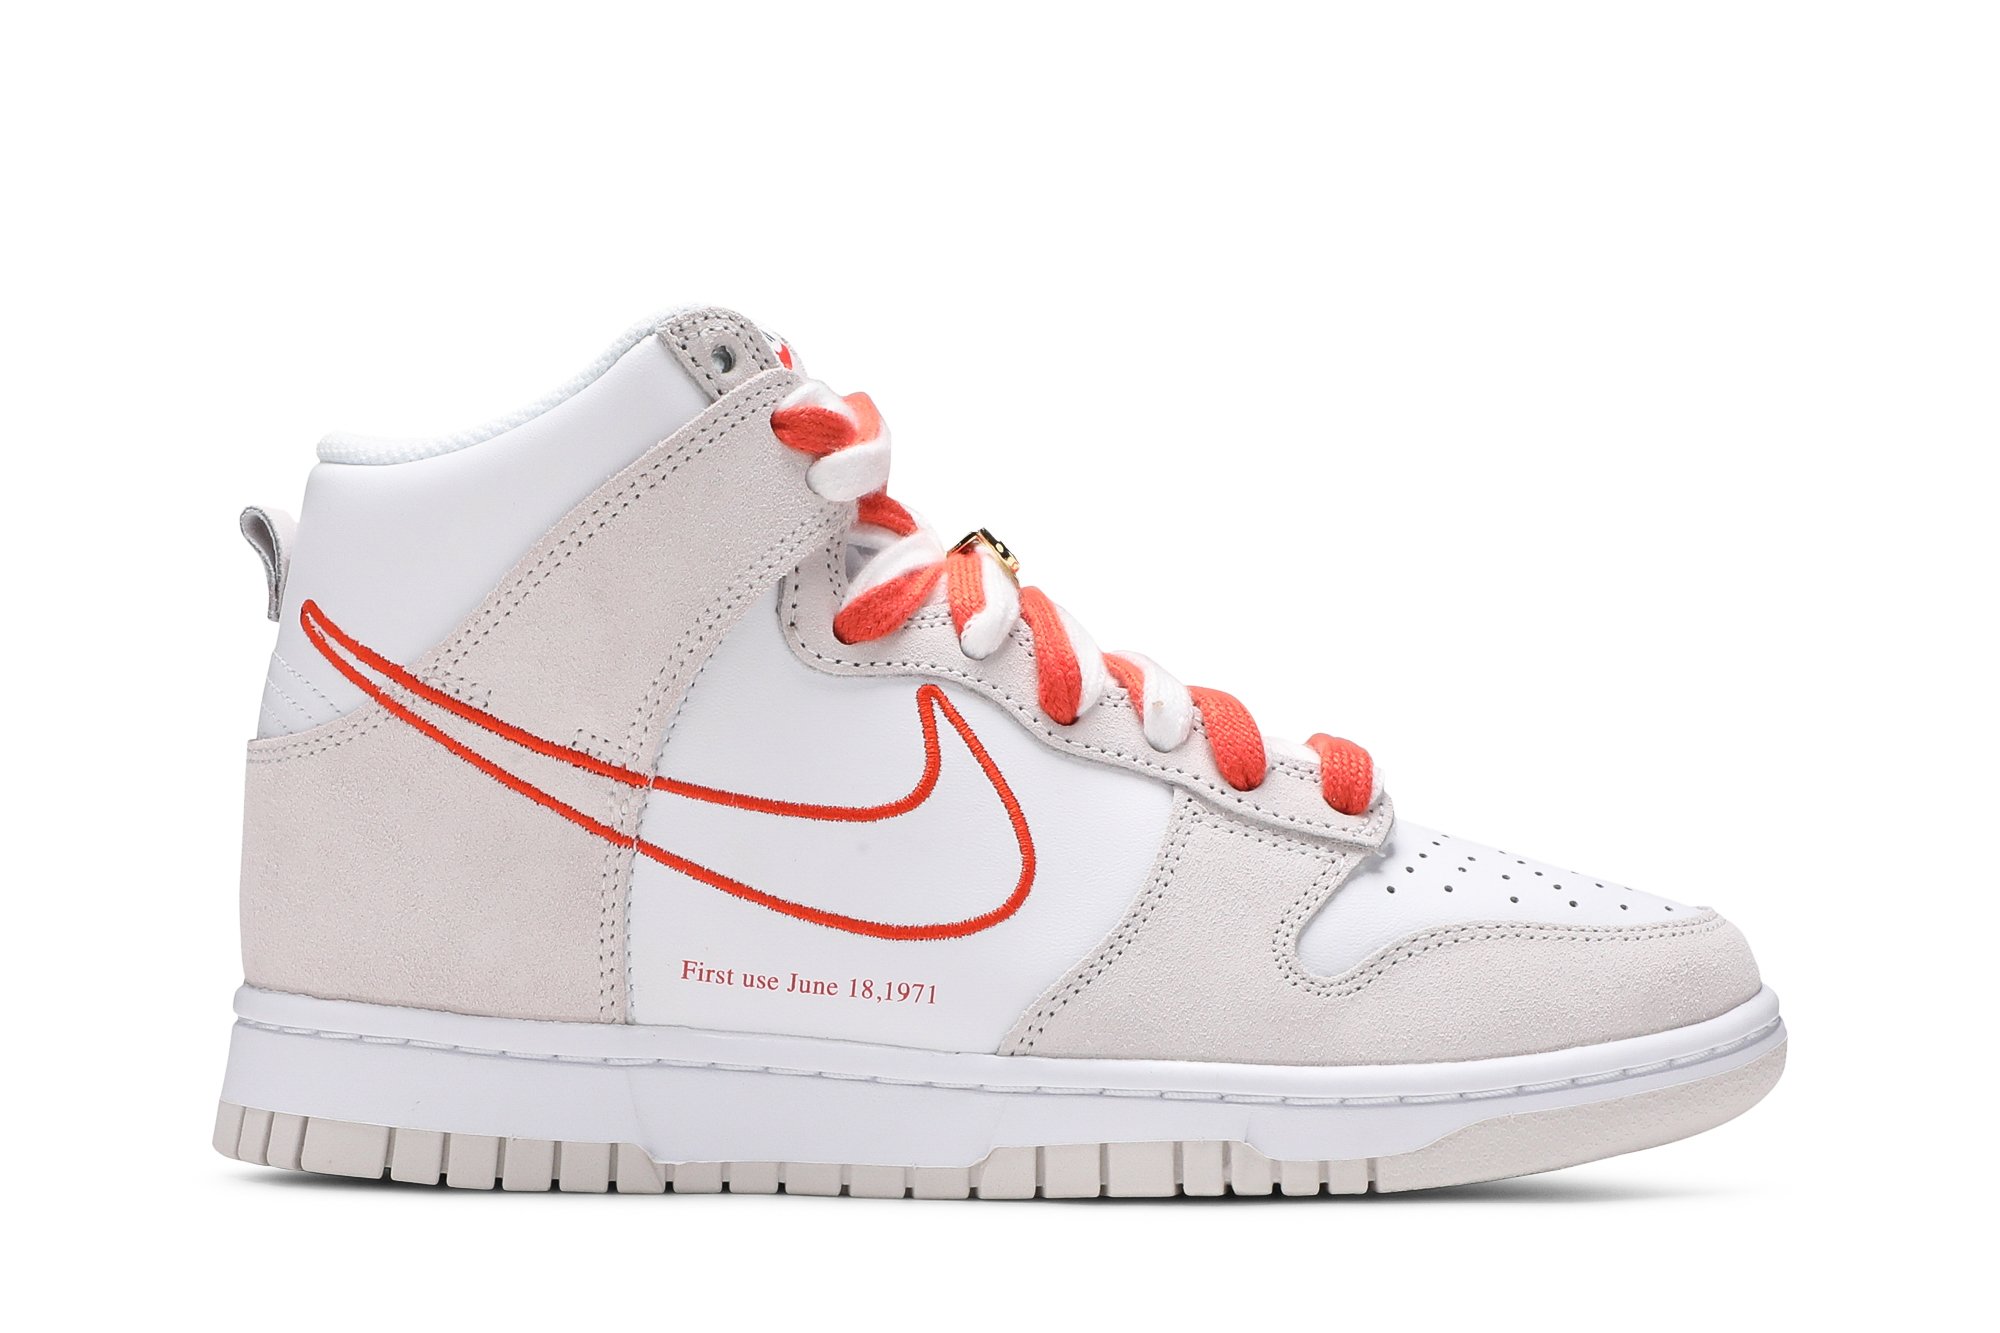 Buy Wmns Dunk High SE 'First Use Pack - White Orange' - DH6758 100